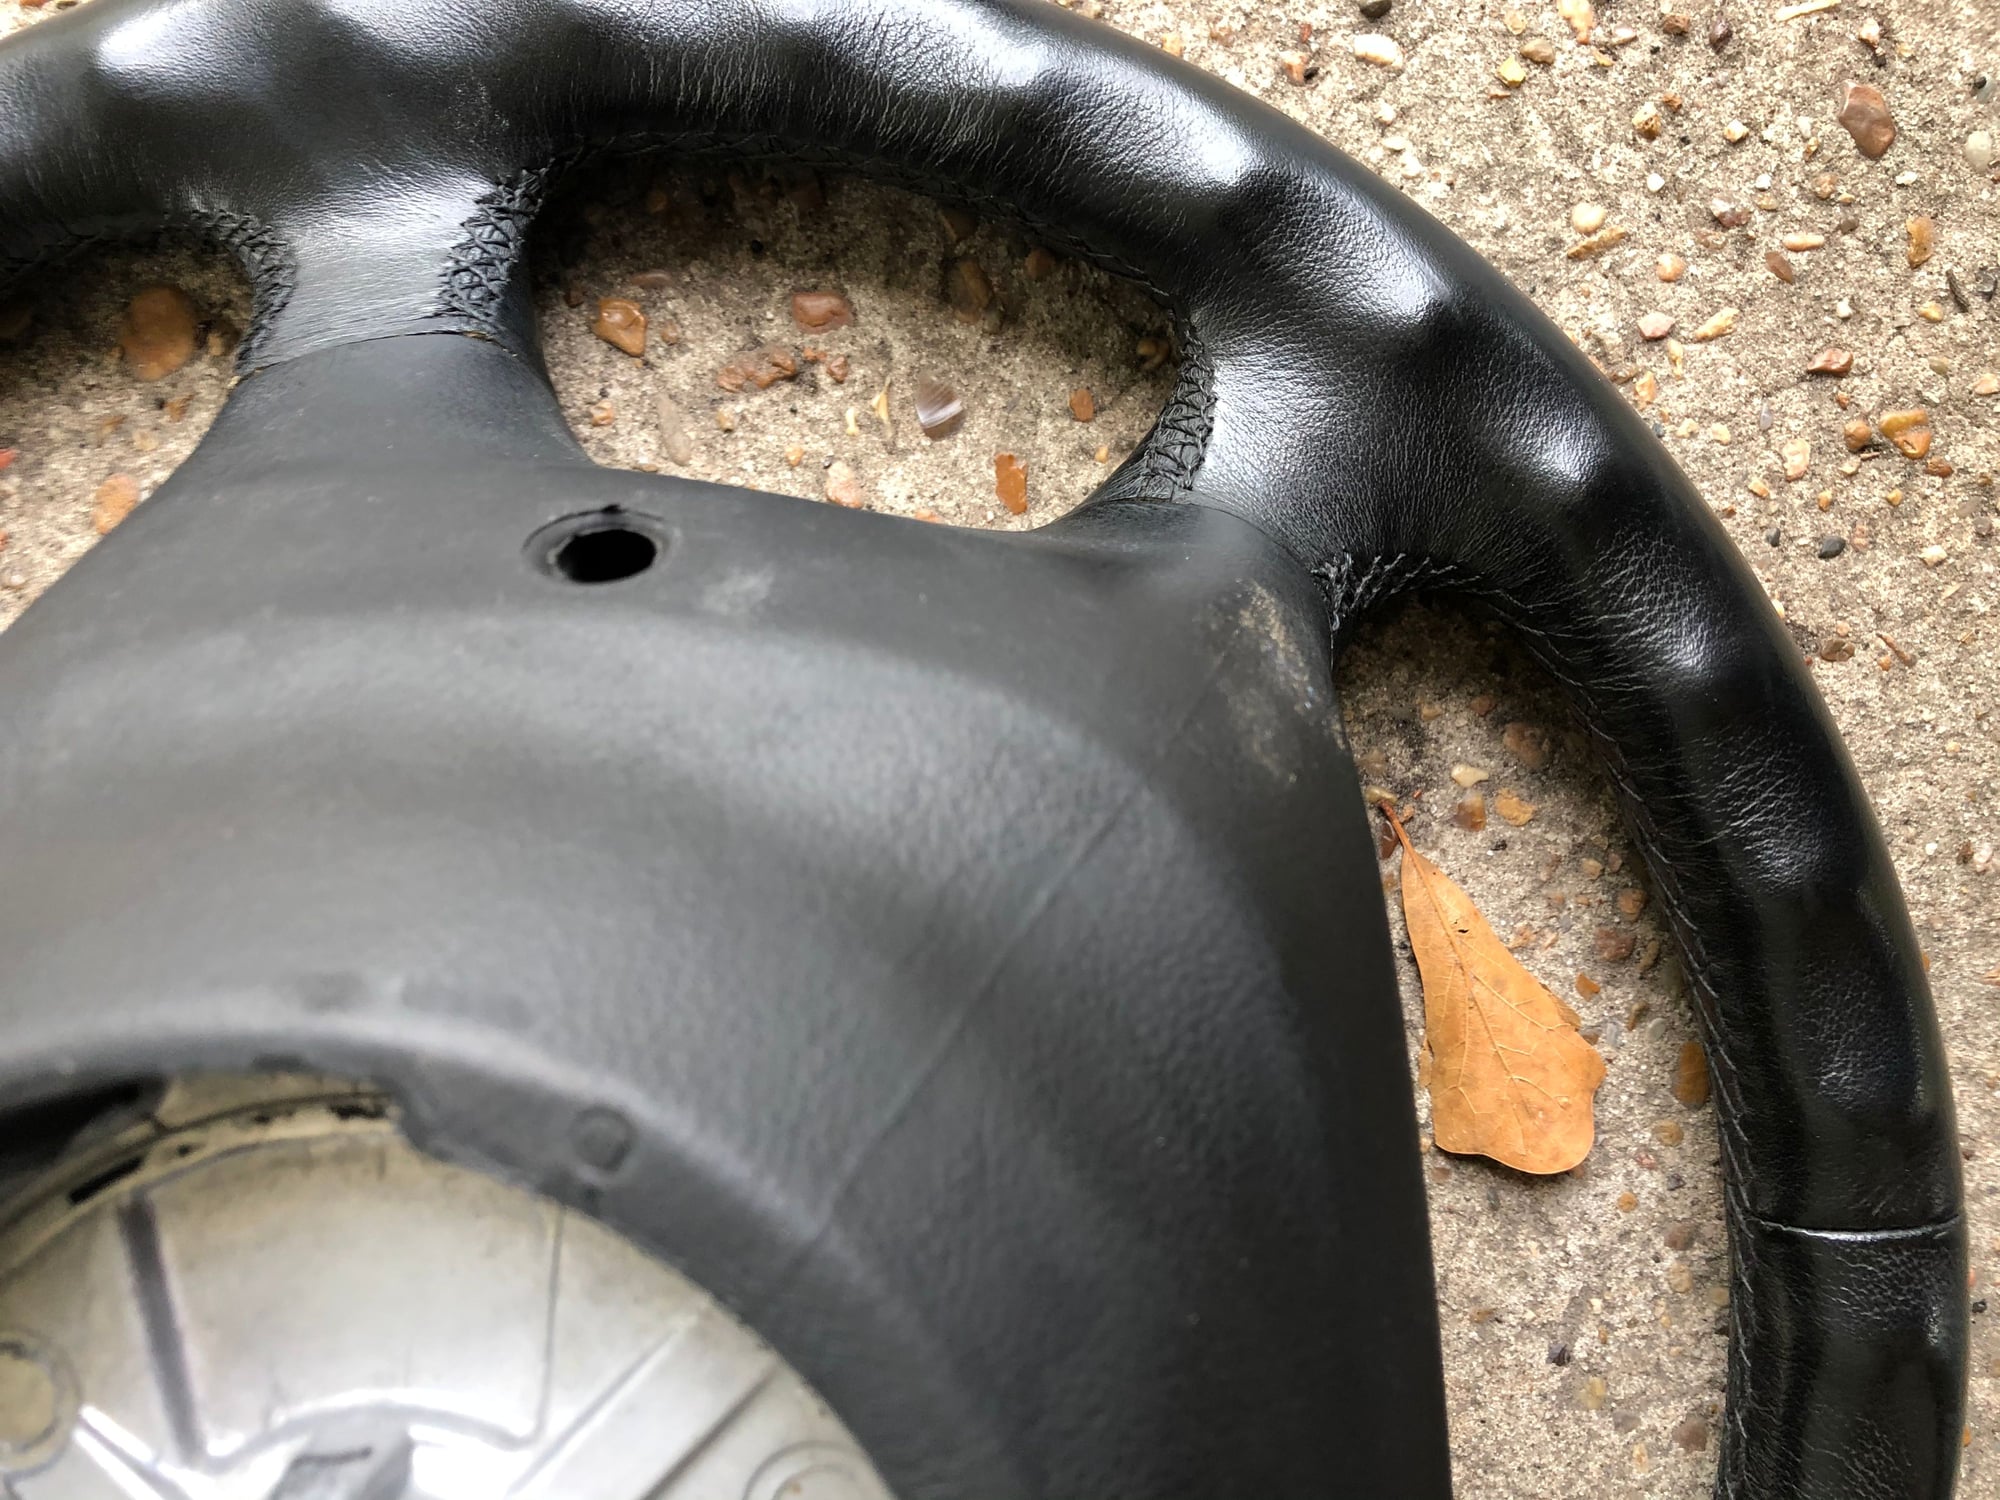 Interior/Upholstery - FOR SALE: Black 4-spoke leather steering wheel and airbag from a 993 - Used - 1995 to 1998 Porsche 911 - Houston, TX 77018, United States